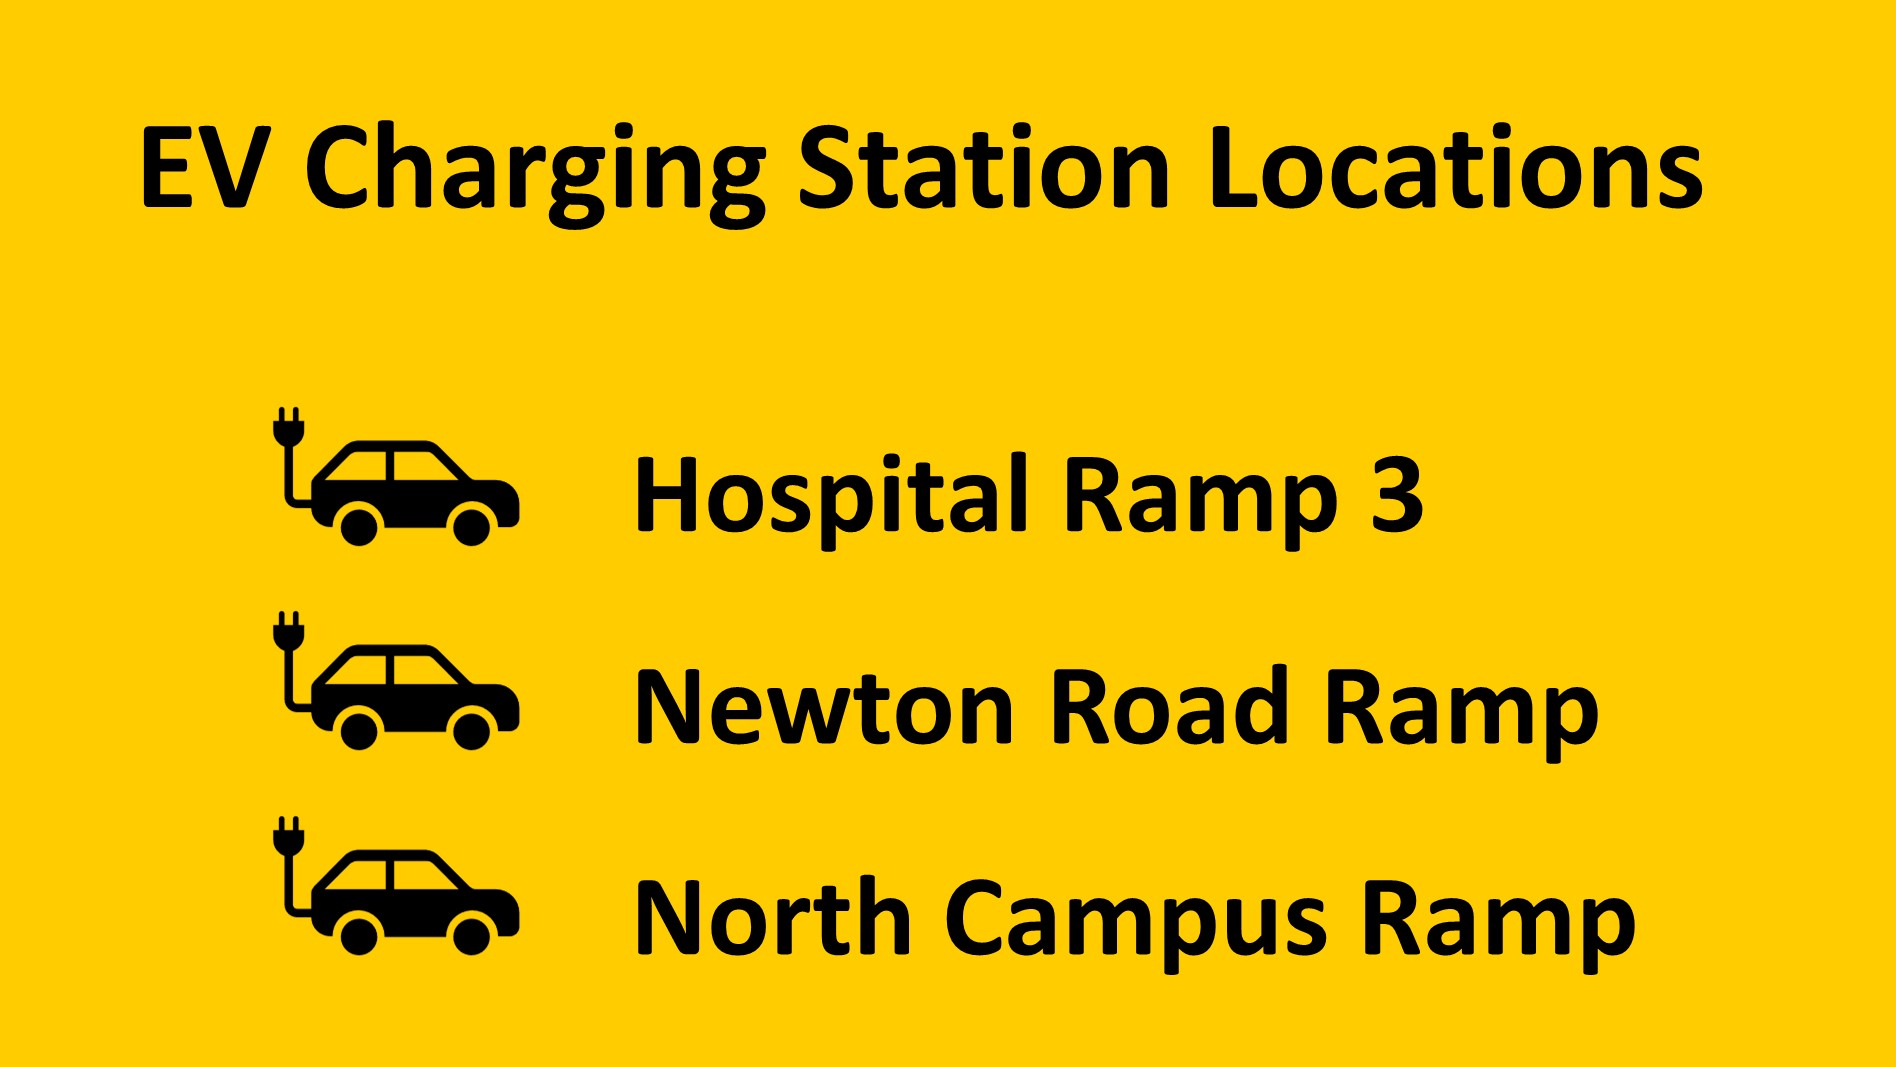 EV charging stations are on campus